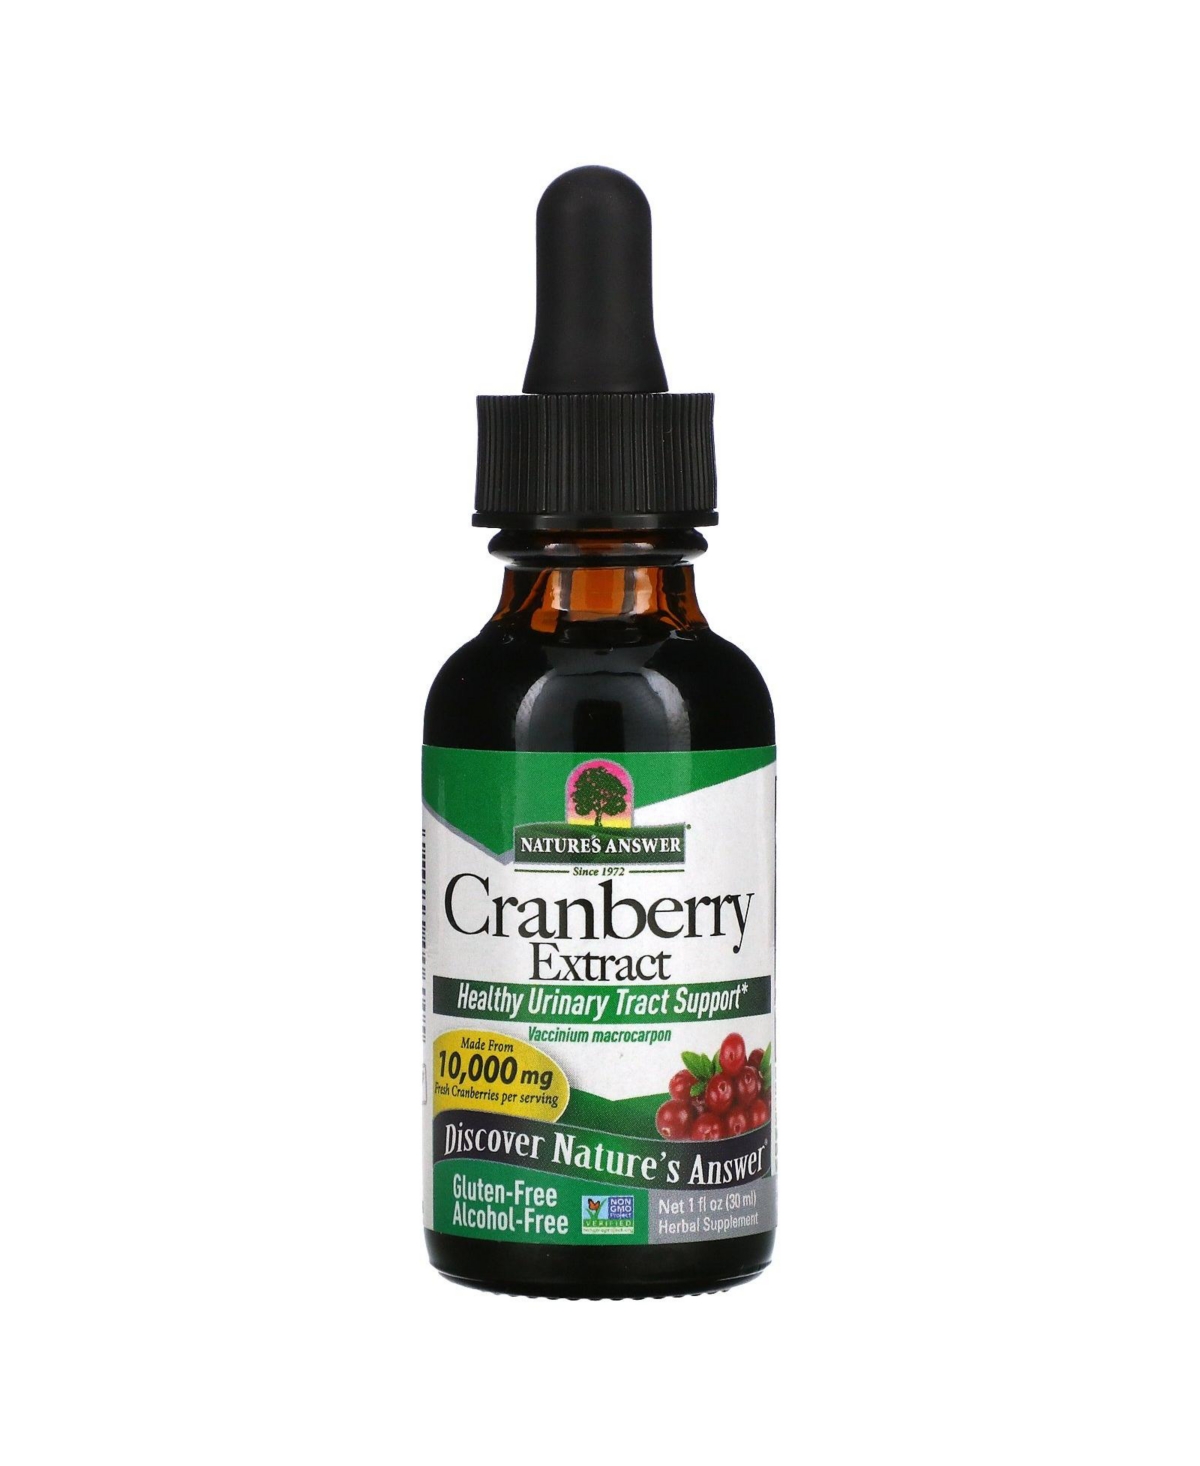 Cranberry Extract Alcohol-Free 10 000 mg - 1 fl oz (30 ml) - Assorted Pre-pack (See Table